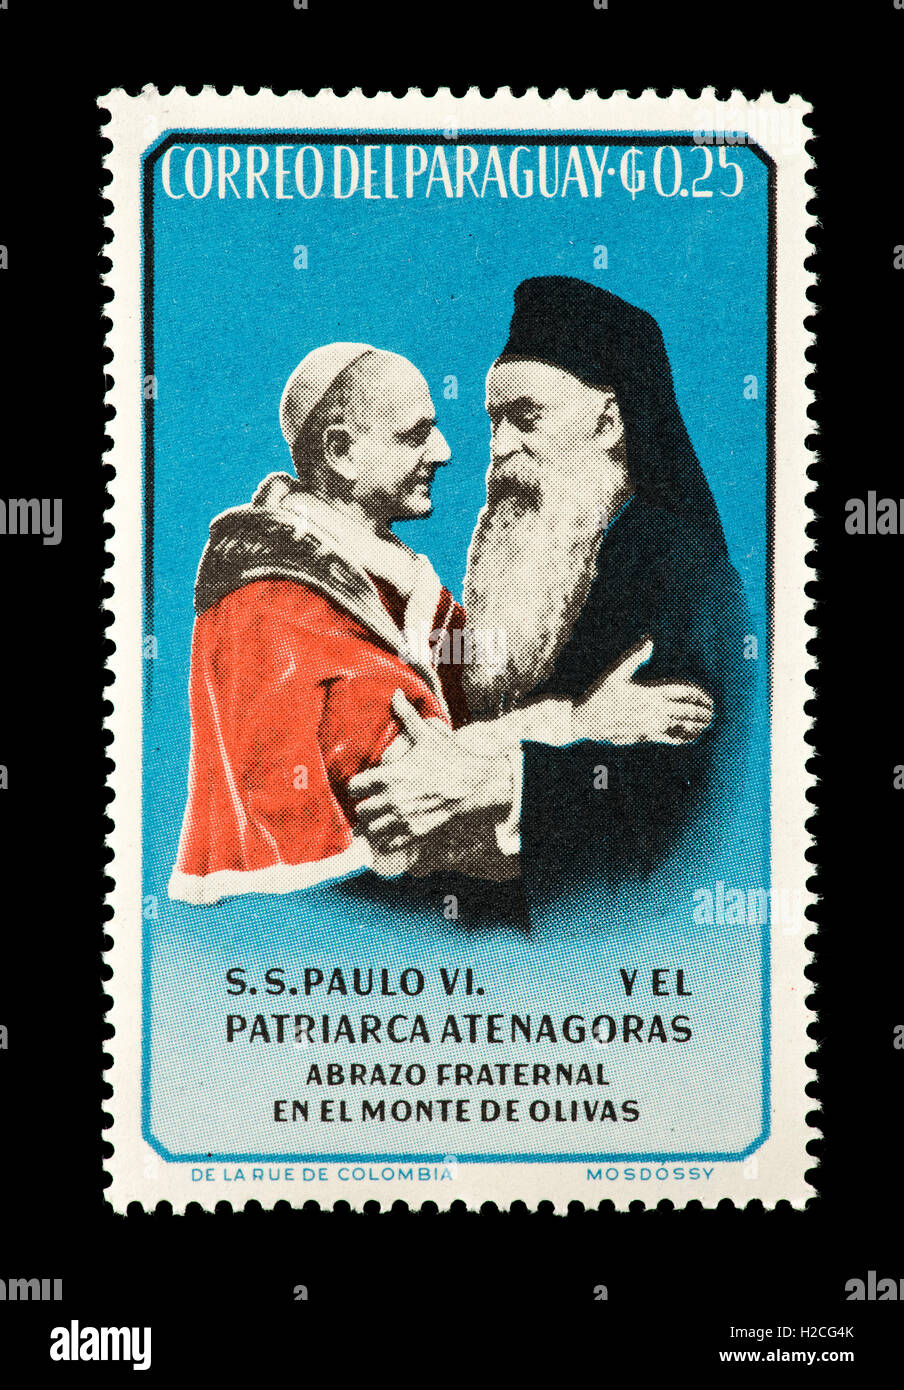 Postage stamp from Paraguay depicting Pope Paul Vi and Patriarch Athenagoras. Stock Photo